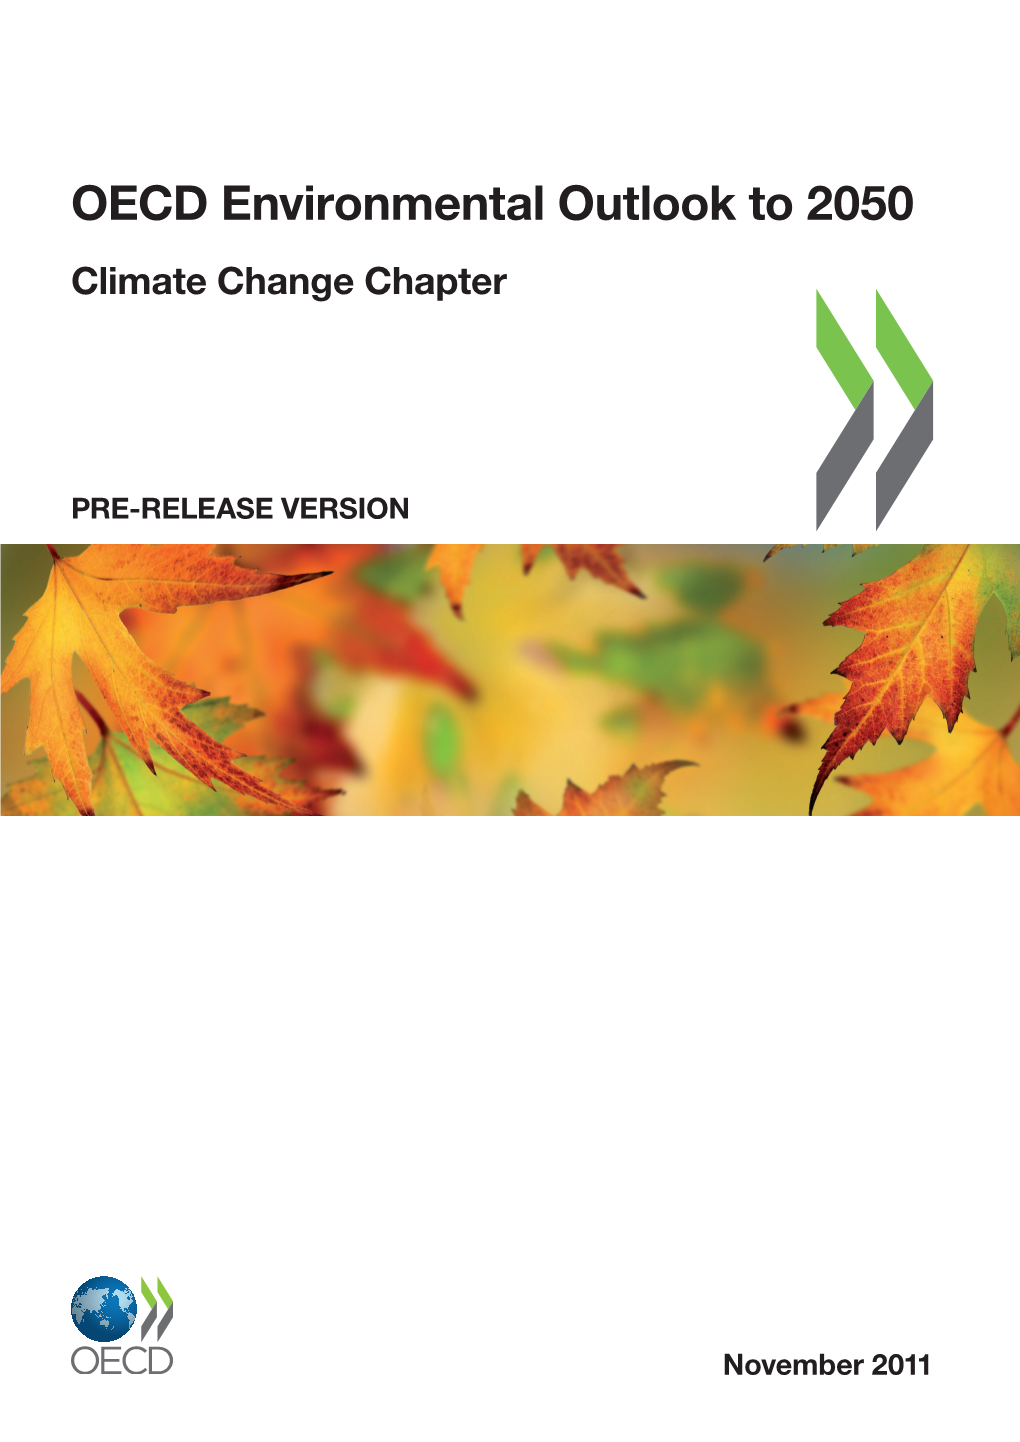 OECD Environmental Outlook to 2050, Climate Change Chapter